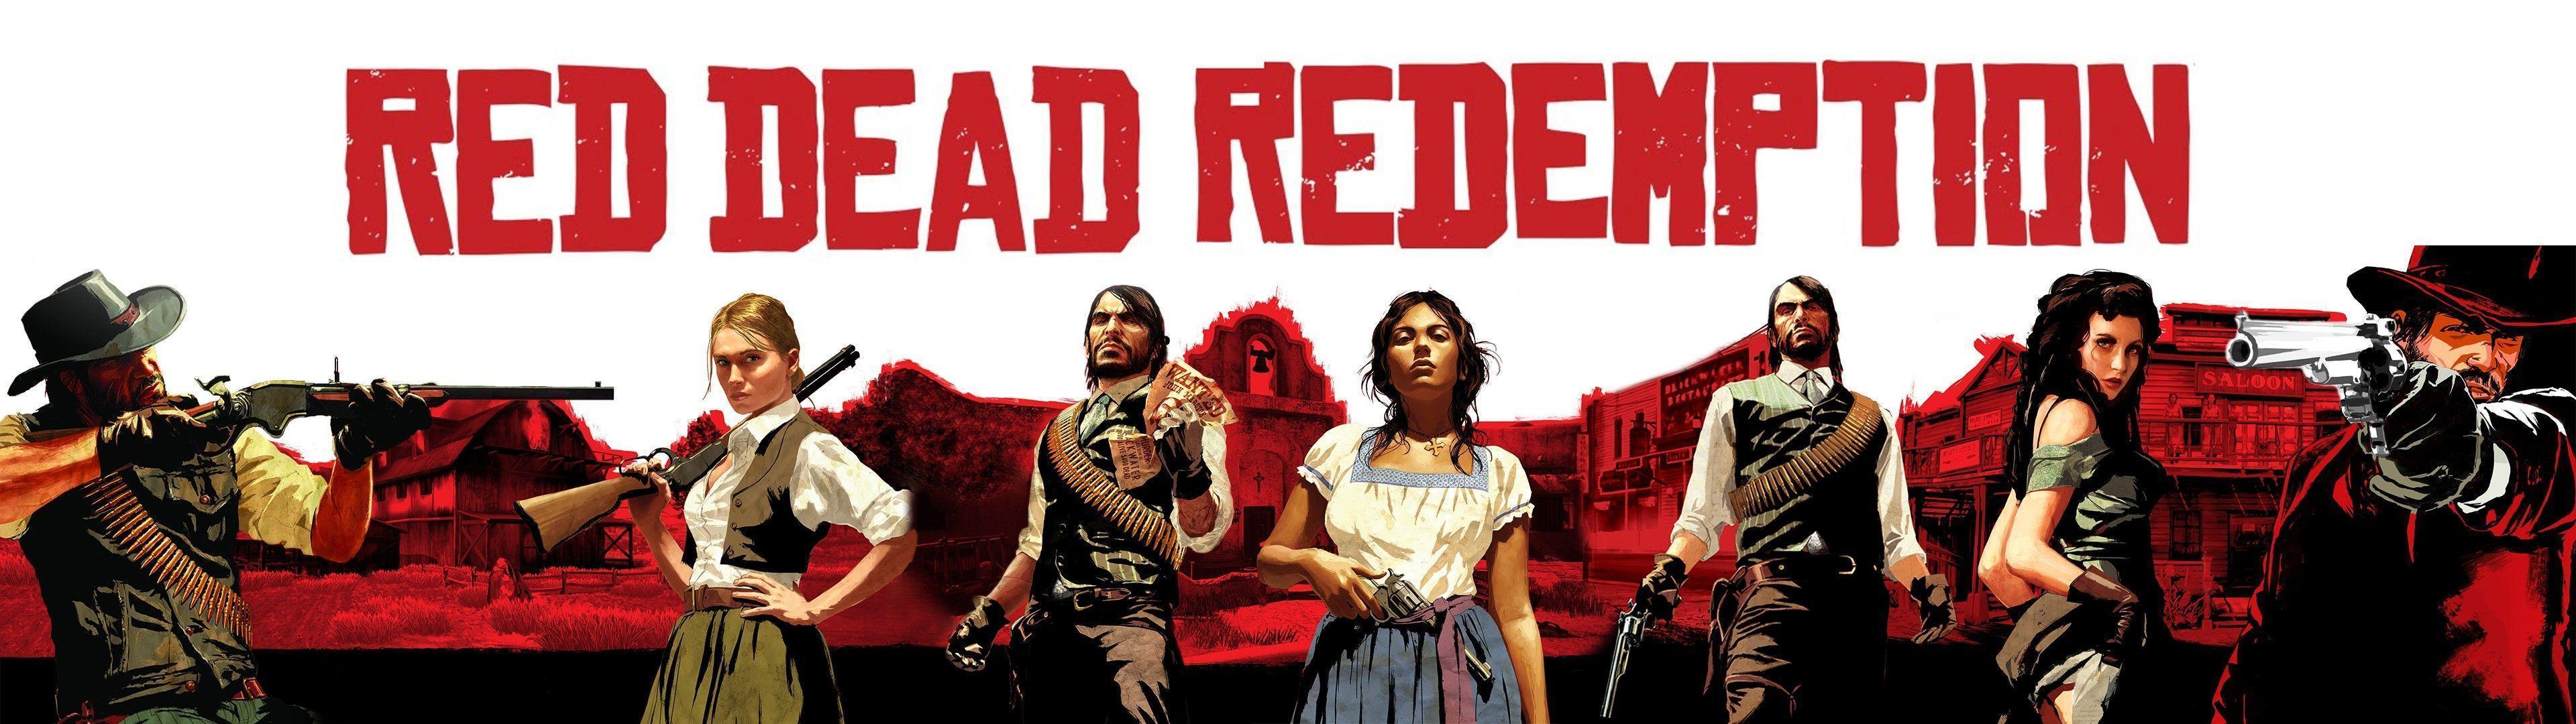 Red Dead Redemption Wallpaper for Facebook cover Wallpaper HD